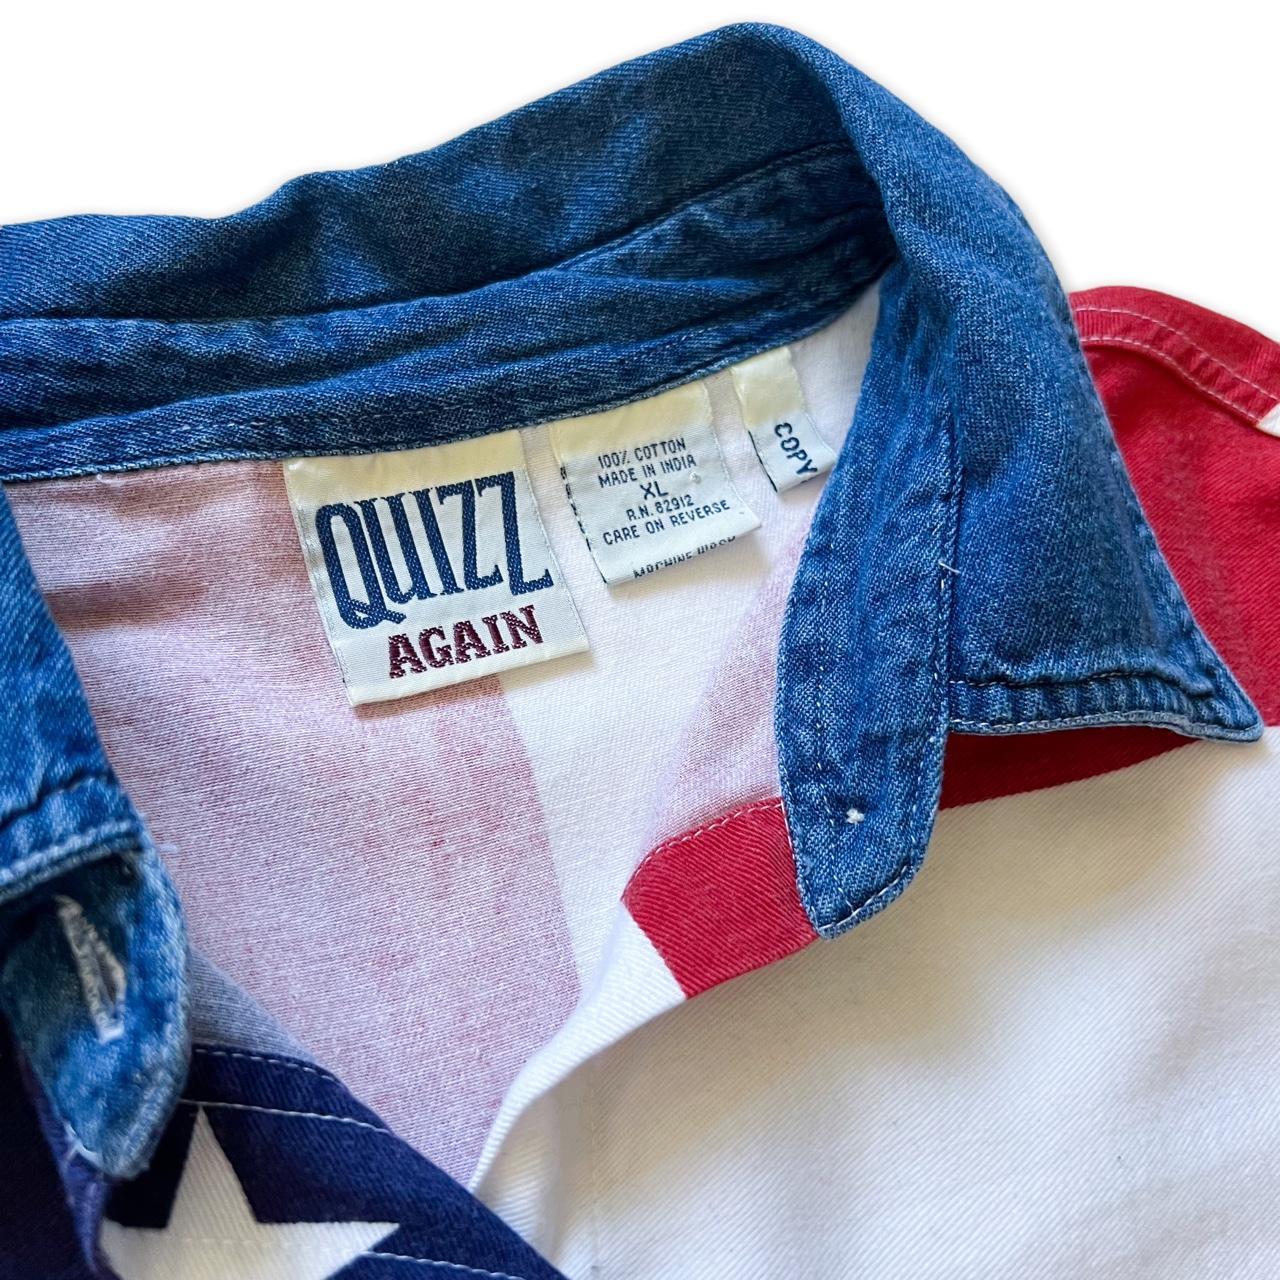 Product Image 3 - Vintage American Flag Shirt

90s American